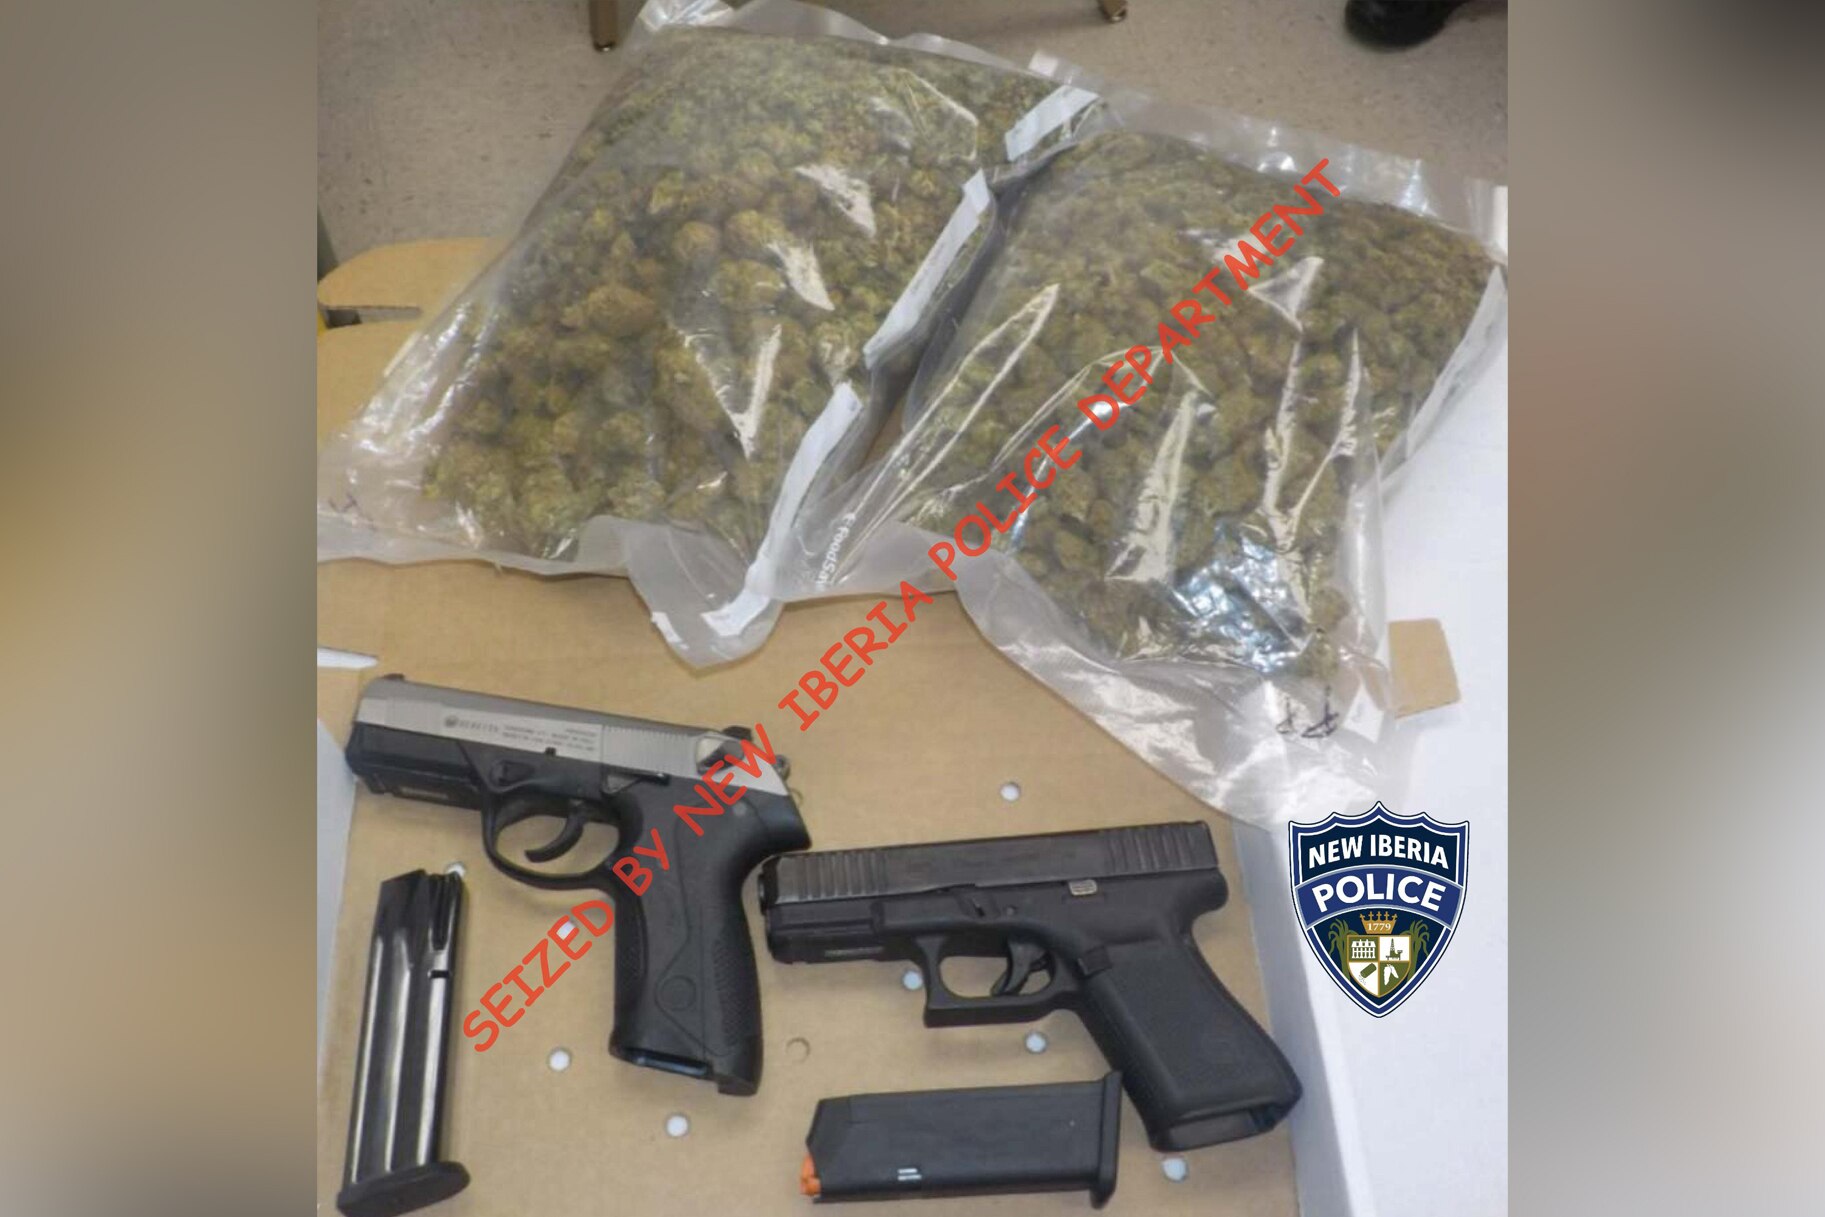 Drug Seizure by the New Iberia Police Department